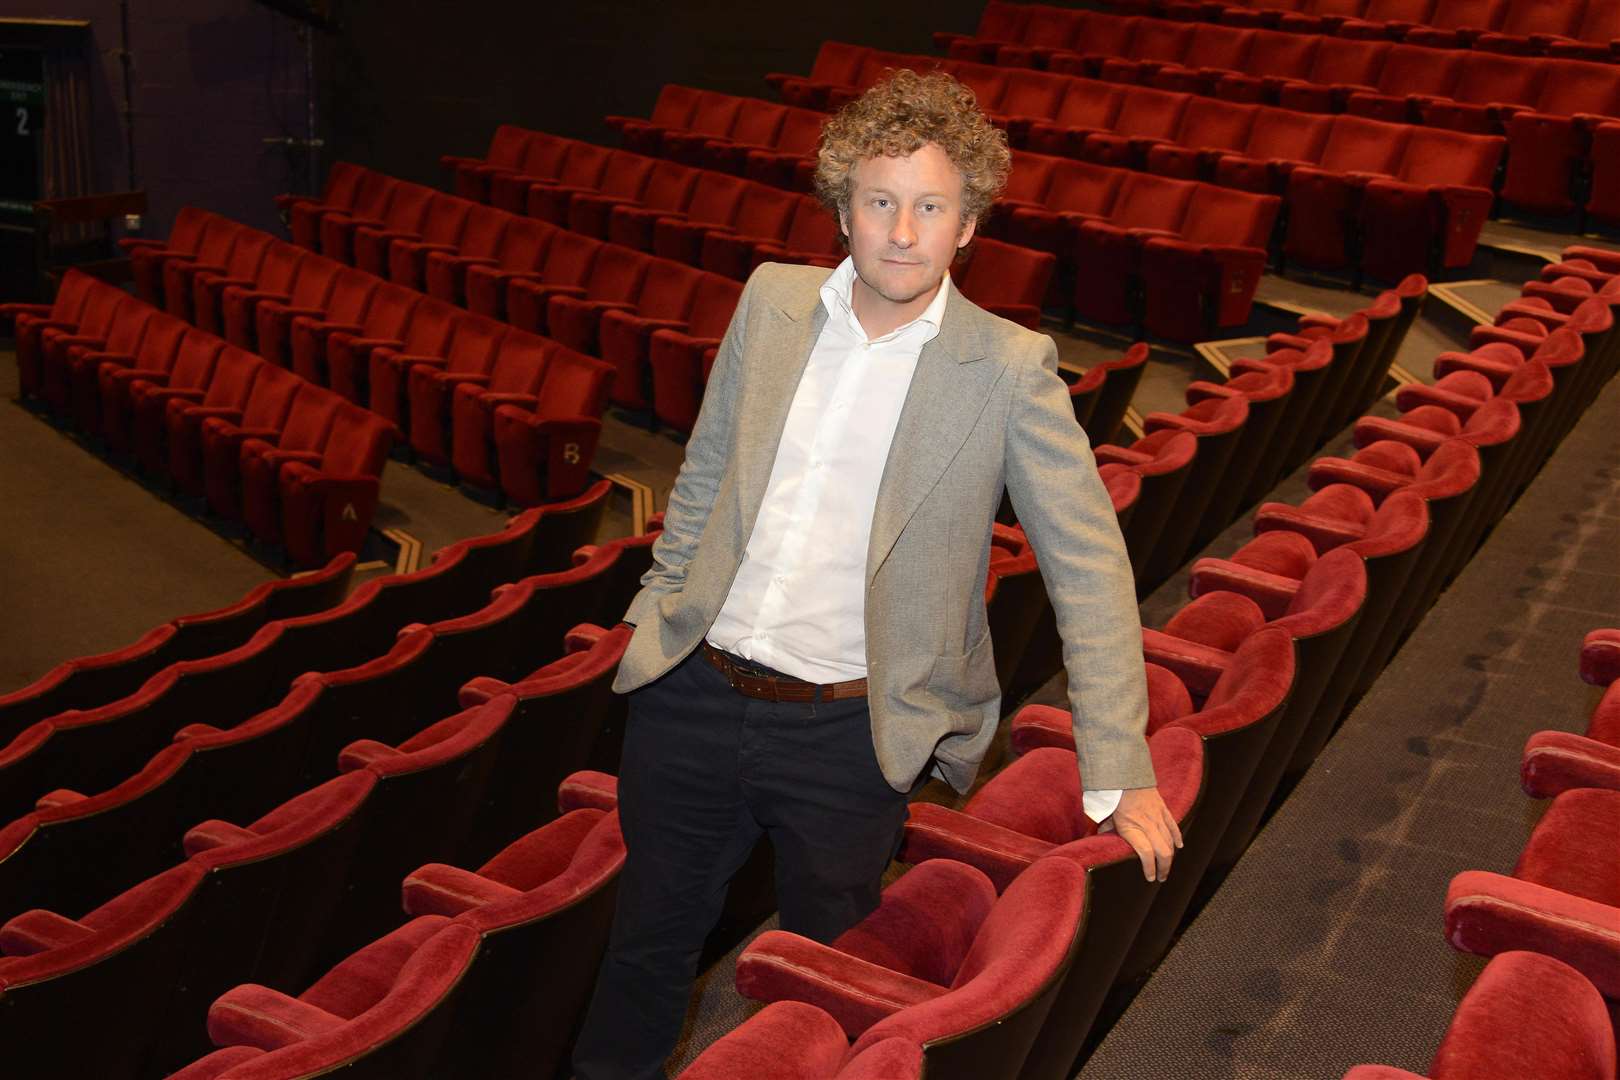 Gulbenkian theatre director Oliver Carruthers